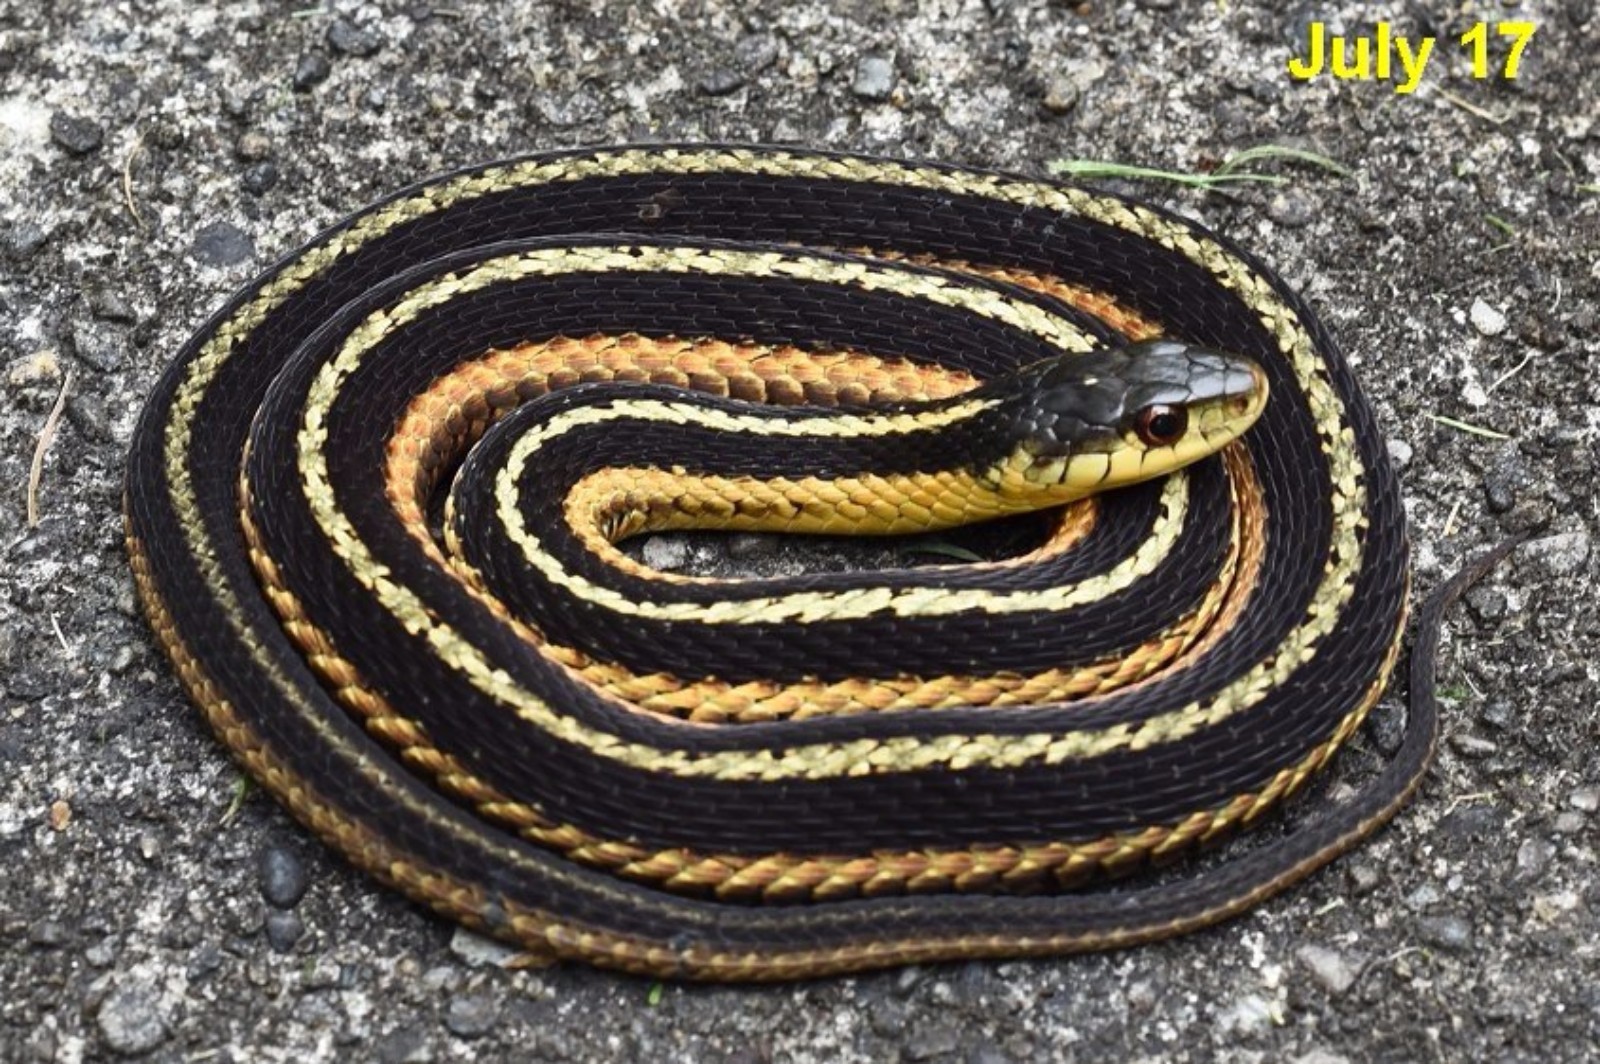 Field Notes: Do black snakes really kill rattlesnakes and copperheads? -  GREENVILLE JOURNAL